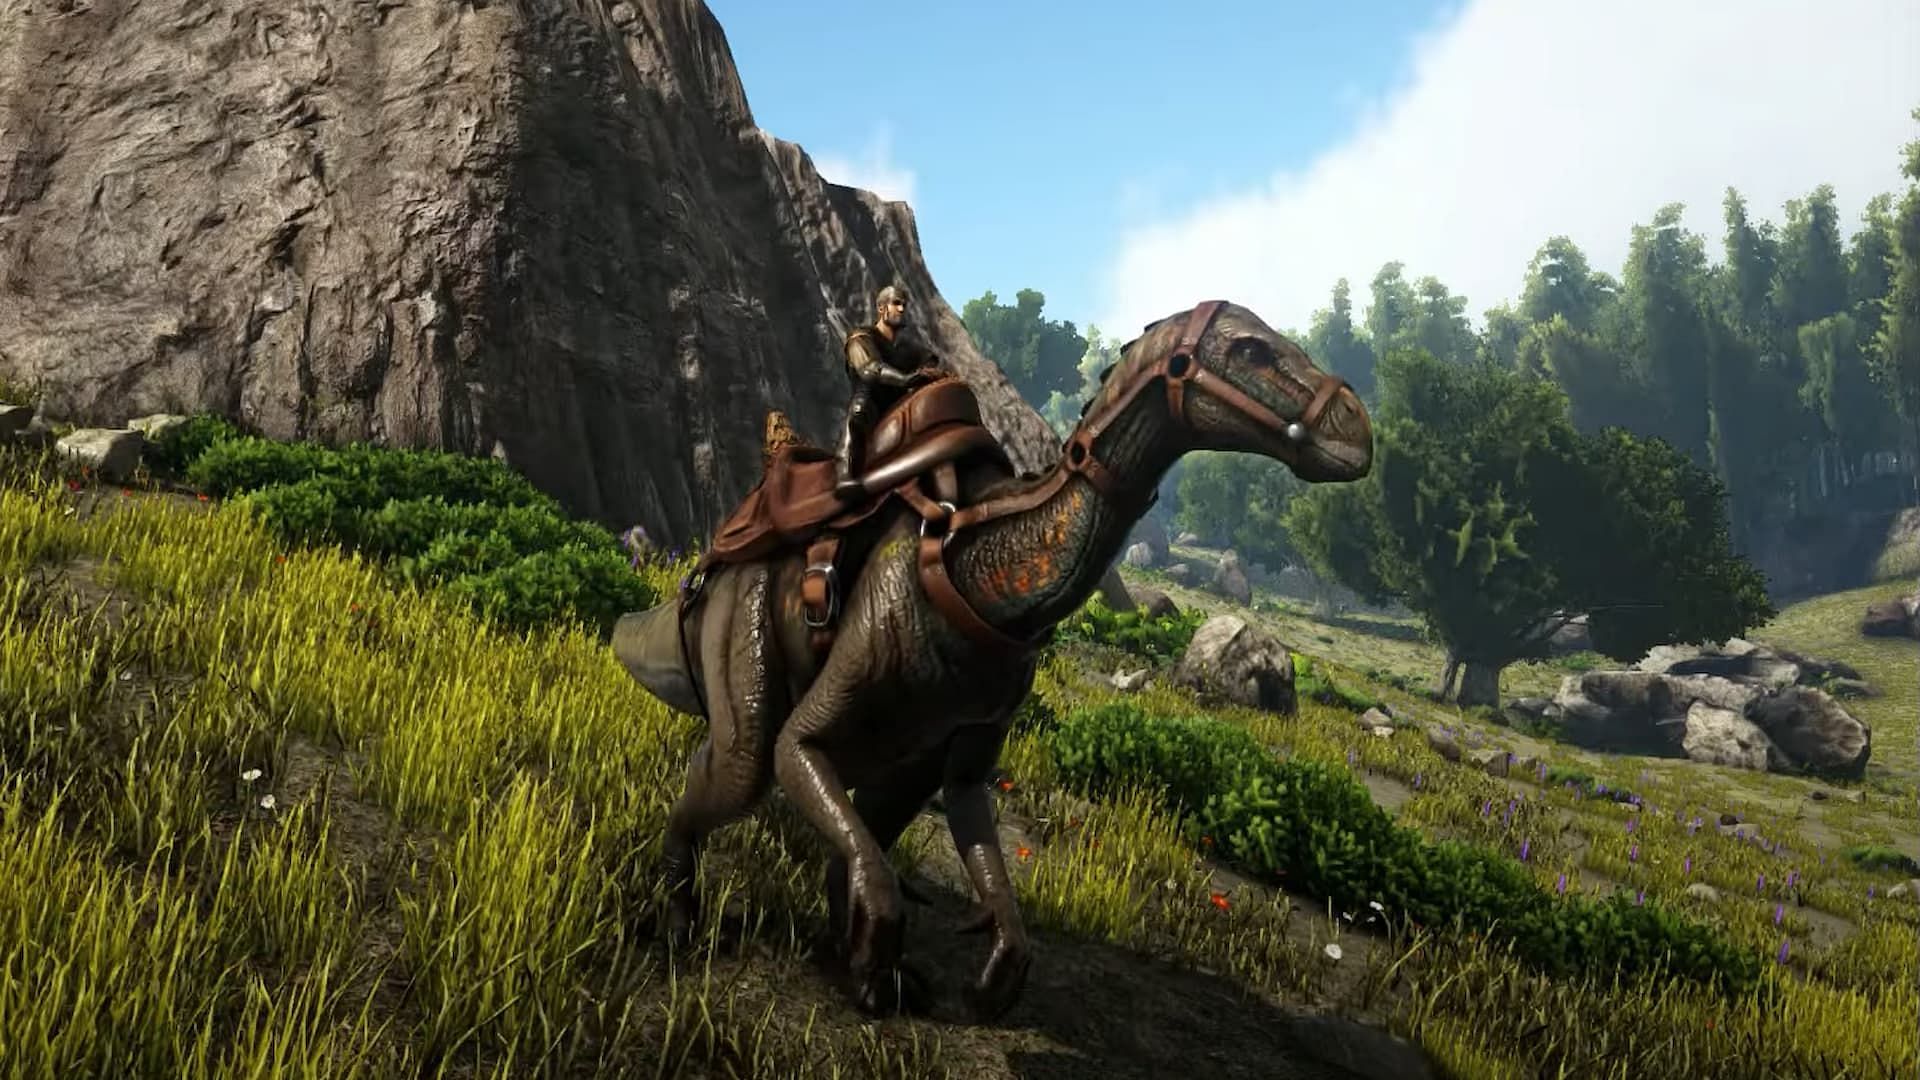 The Iguanodon is a great mount in ARK Survival Ascended (Image via Studio Wildfire)